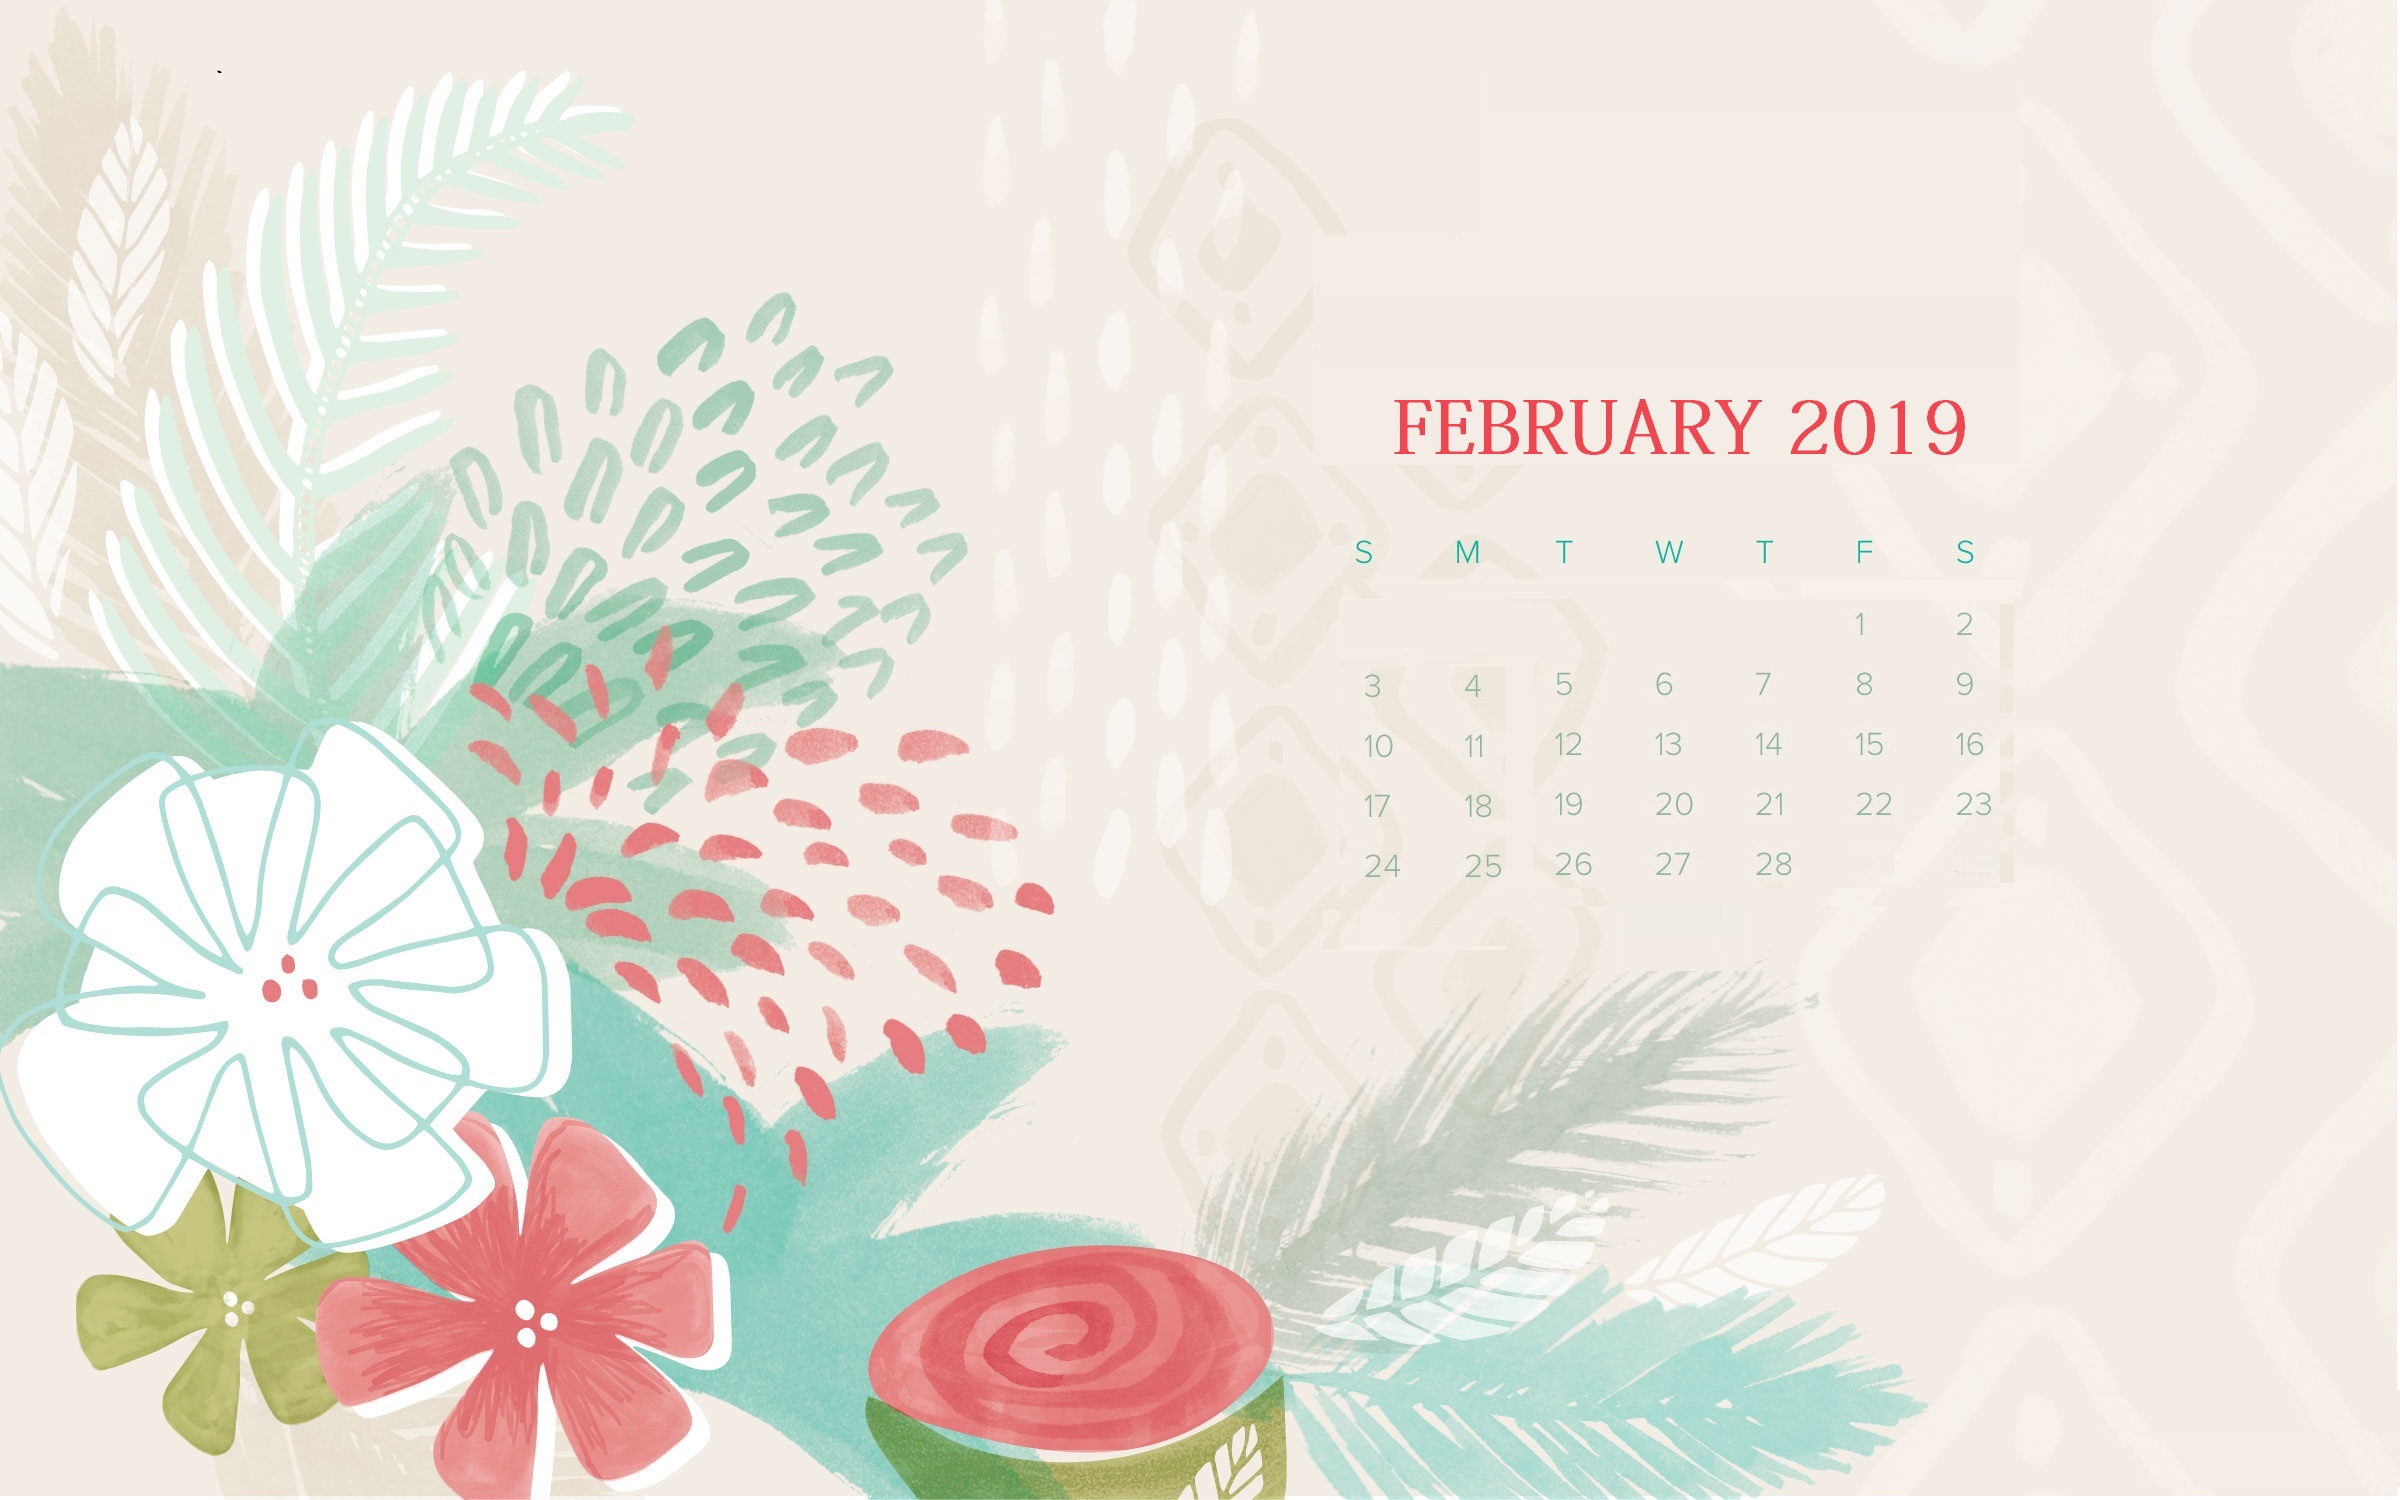 Free February 2019 Wallpaper With Calendar - April Calendar Wallpaper 2019 - HD Wallpaper 